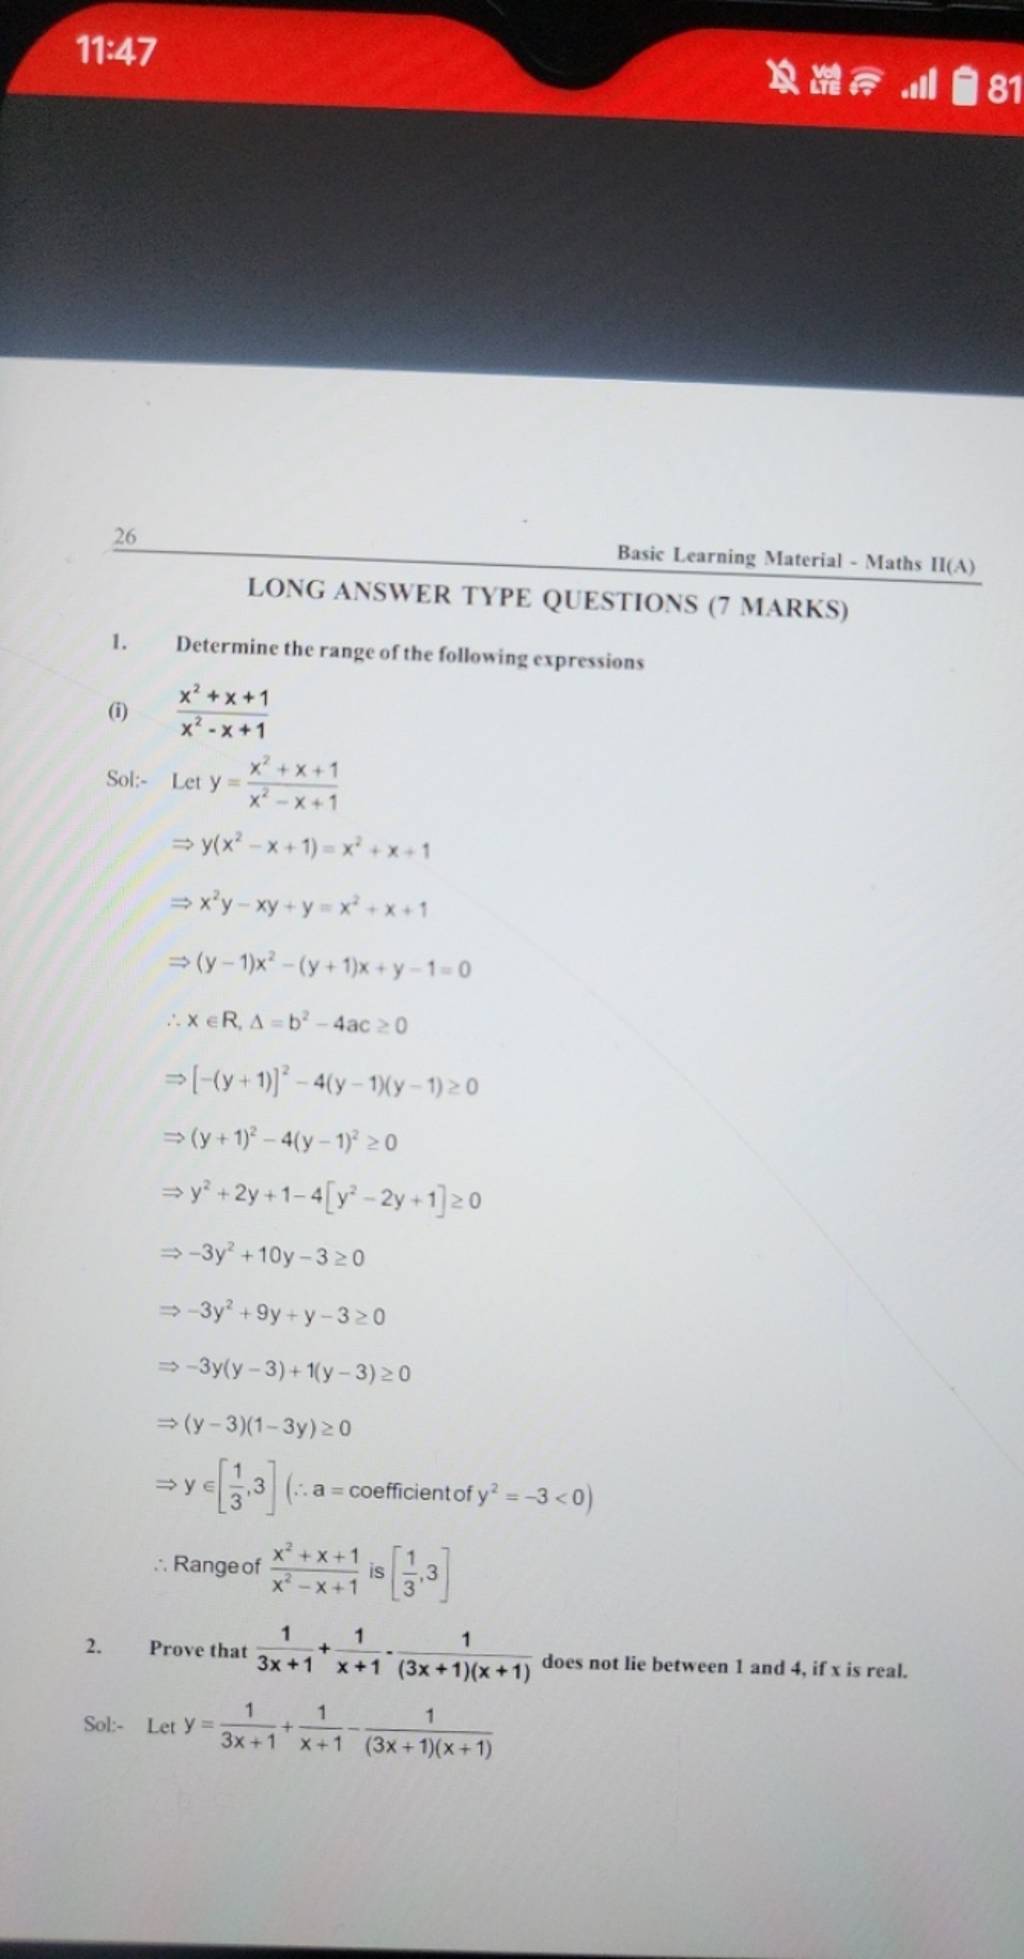 11:47
26
Basic Learning Material - Maths II(A)
LONG ANSWER TYPE QUESTI